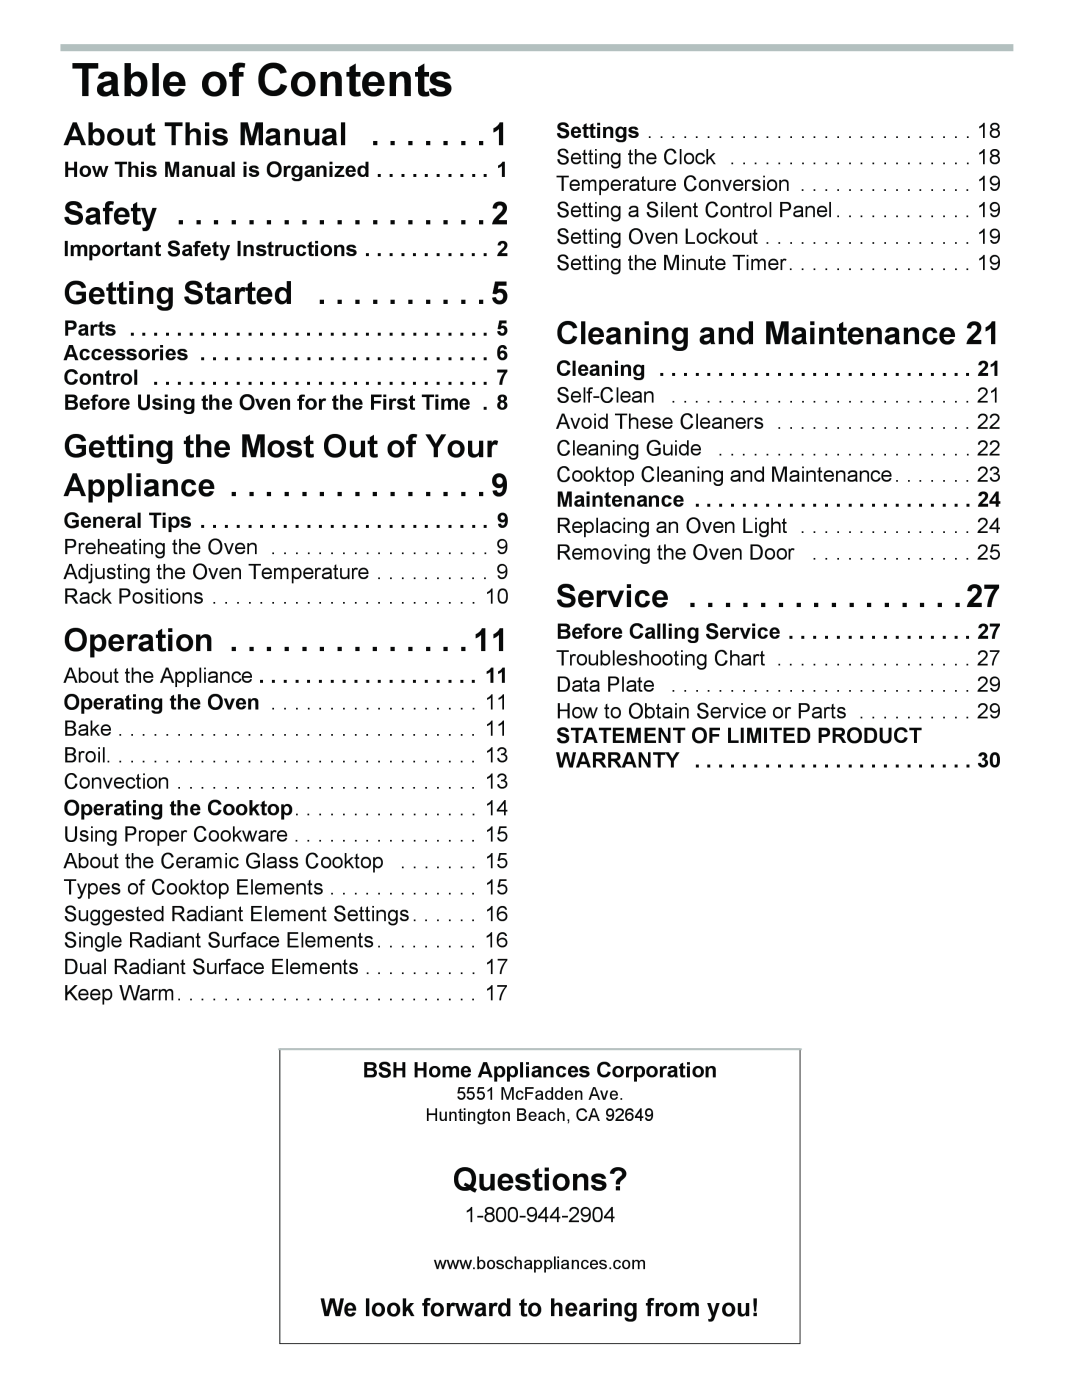 Bosch Appliances HES3063U Table of Contents, About This Manual, Safety, Getting Started, Operation, Service, Questions? 